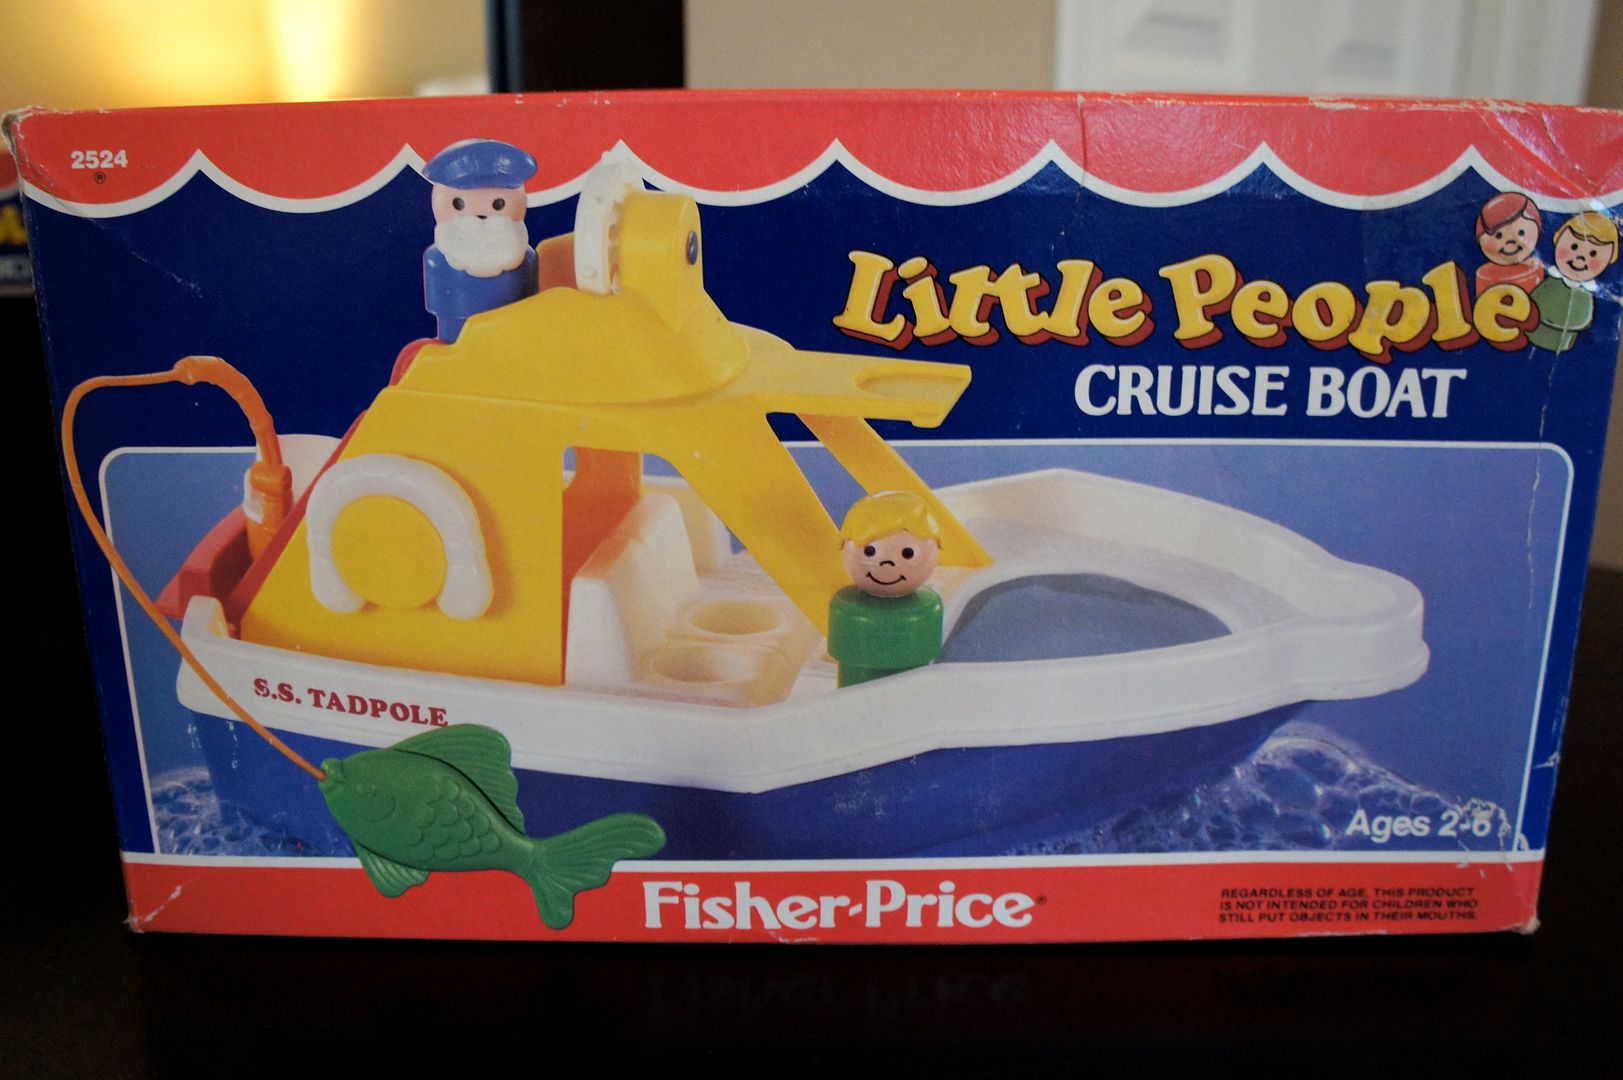 Anne's Odds and Ends: Fisher Price Friday - Cruise Boat